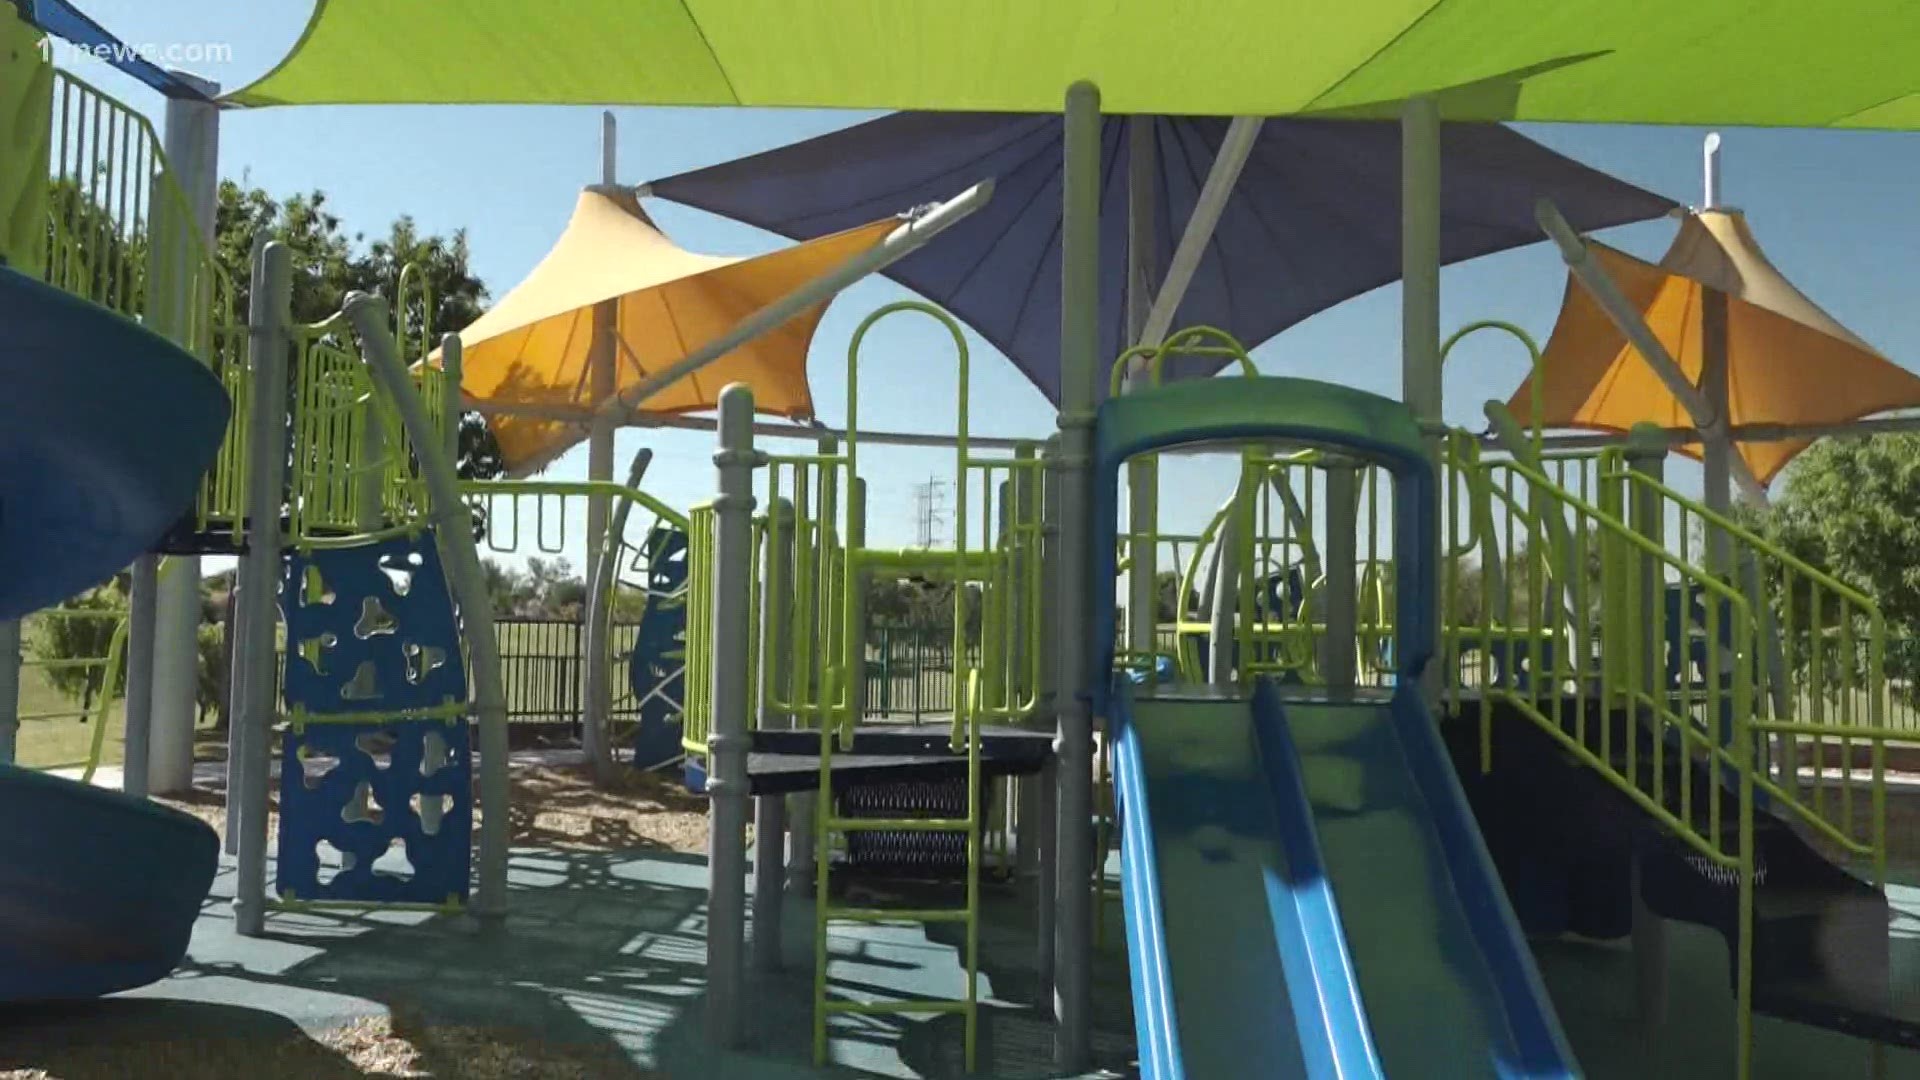 The city of Tempe is reopening parks ahead of the Labor Day weekend. Team 12's Trisha Hendricks has the latest.